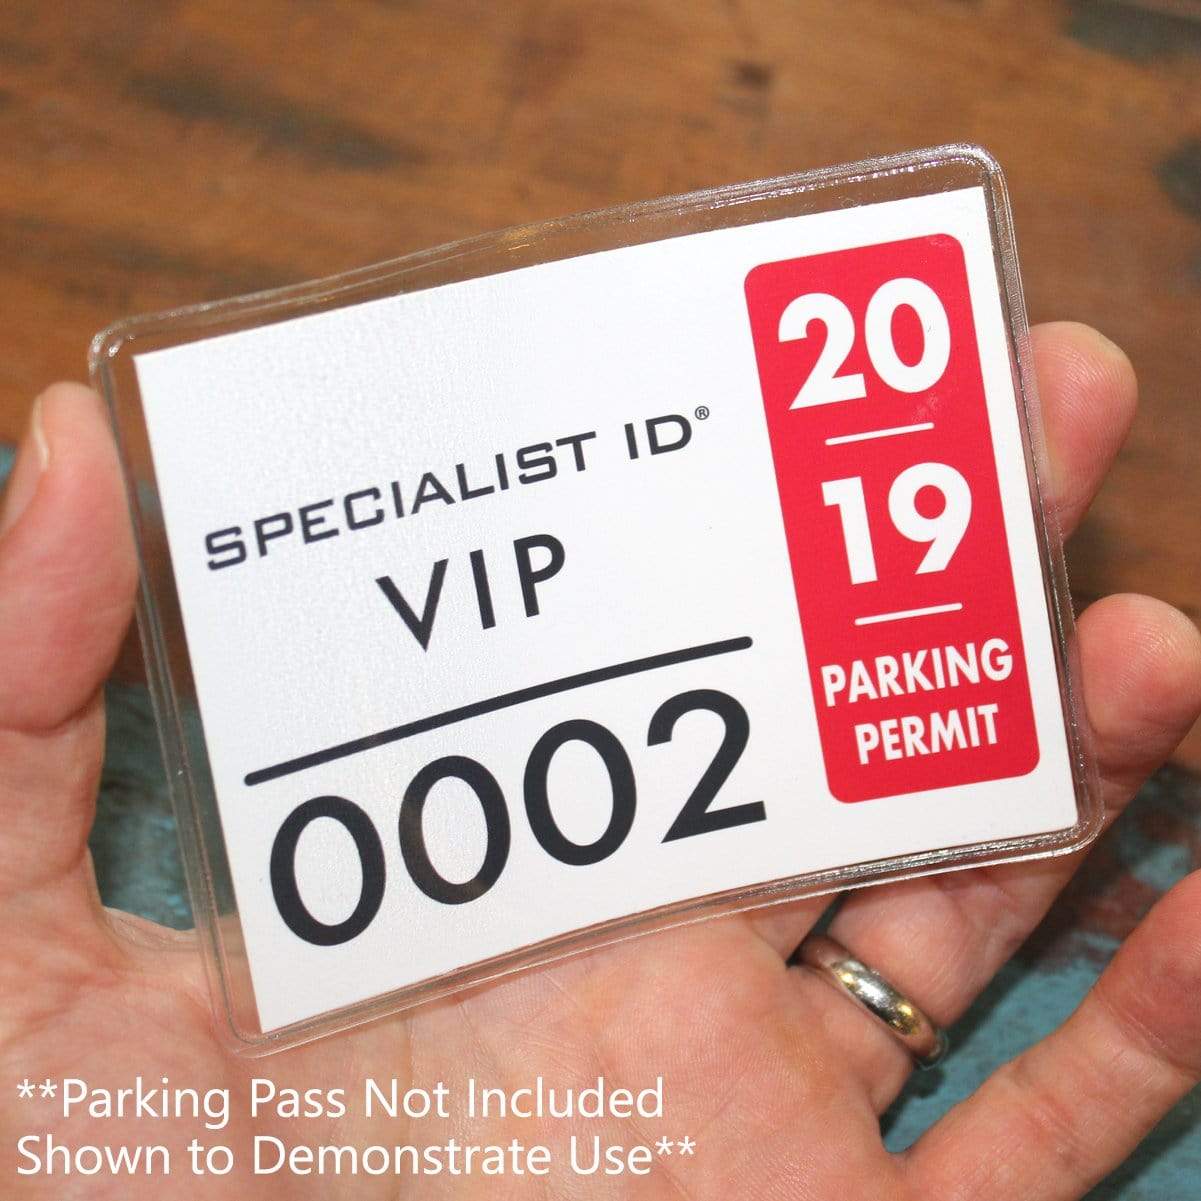 Large 4 x 3 Adhesive Badge Holders with Sticky Back - Clear Vinyl Parking Pass Holders for Windshield (CE-4P) CE-4P